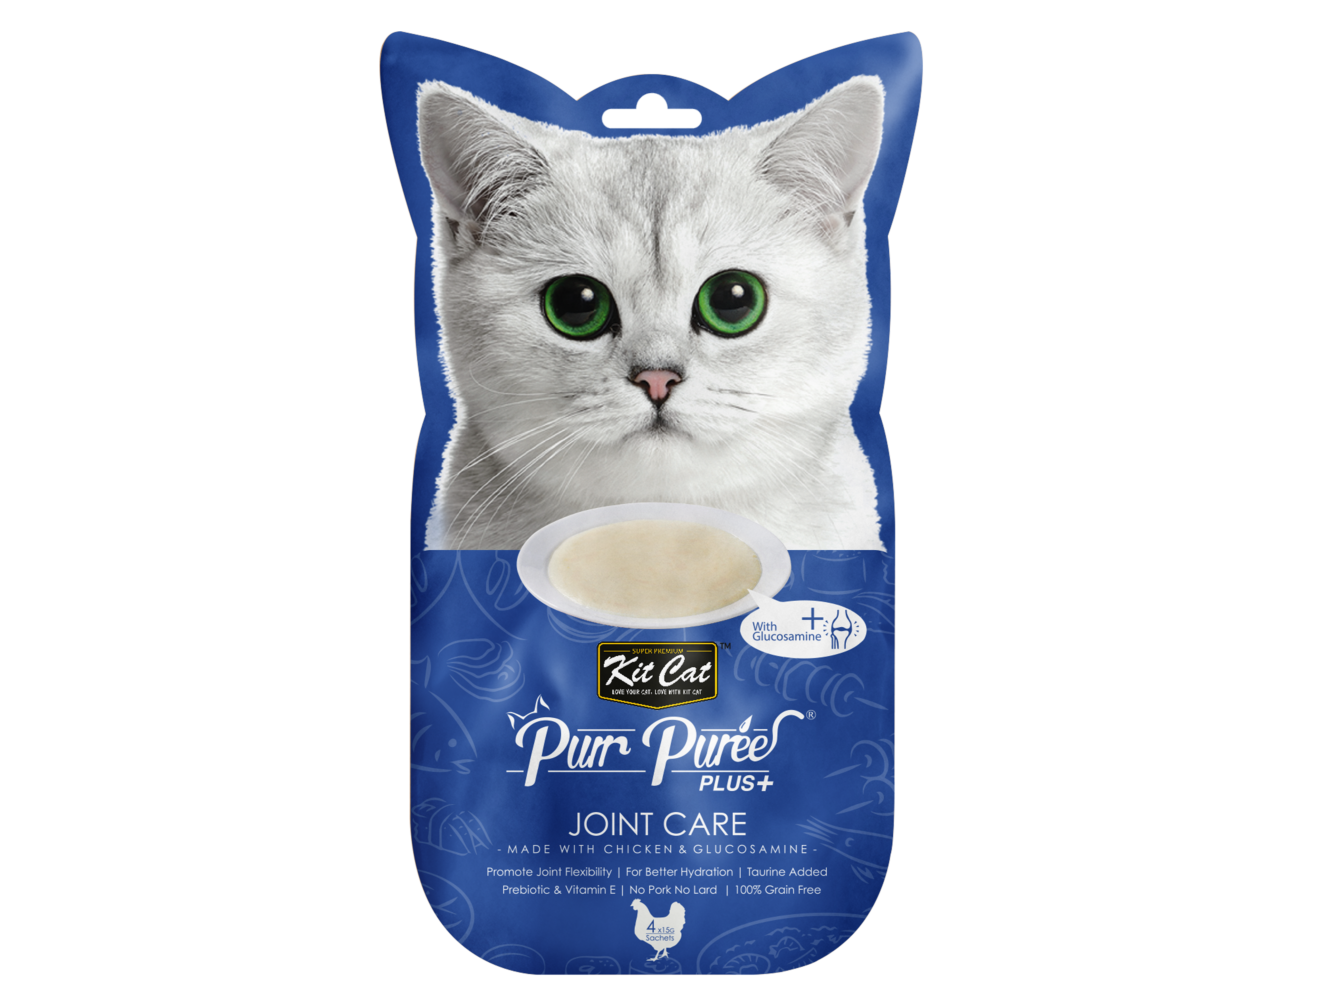 Kit Cat Purr Puree Plus+ Joint Care 4x15g (Chicken)